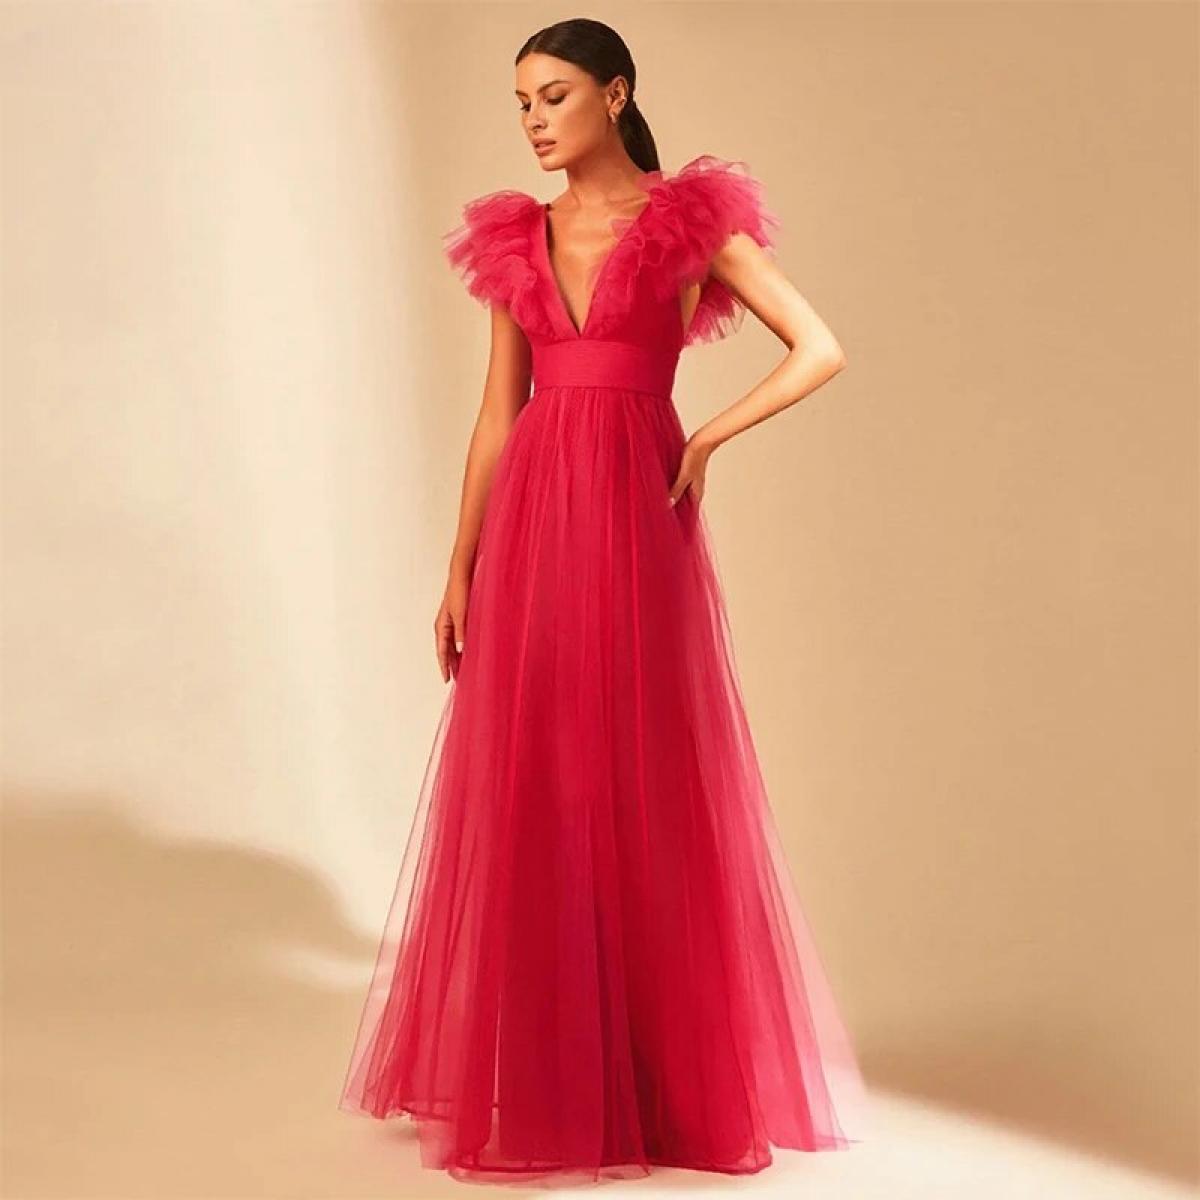 Women's Prom Dress For Women Formal Occasion Dresses For Day And Night Party Elegant Gown Luxurious Turkish Evening Gown